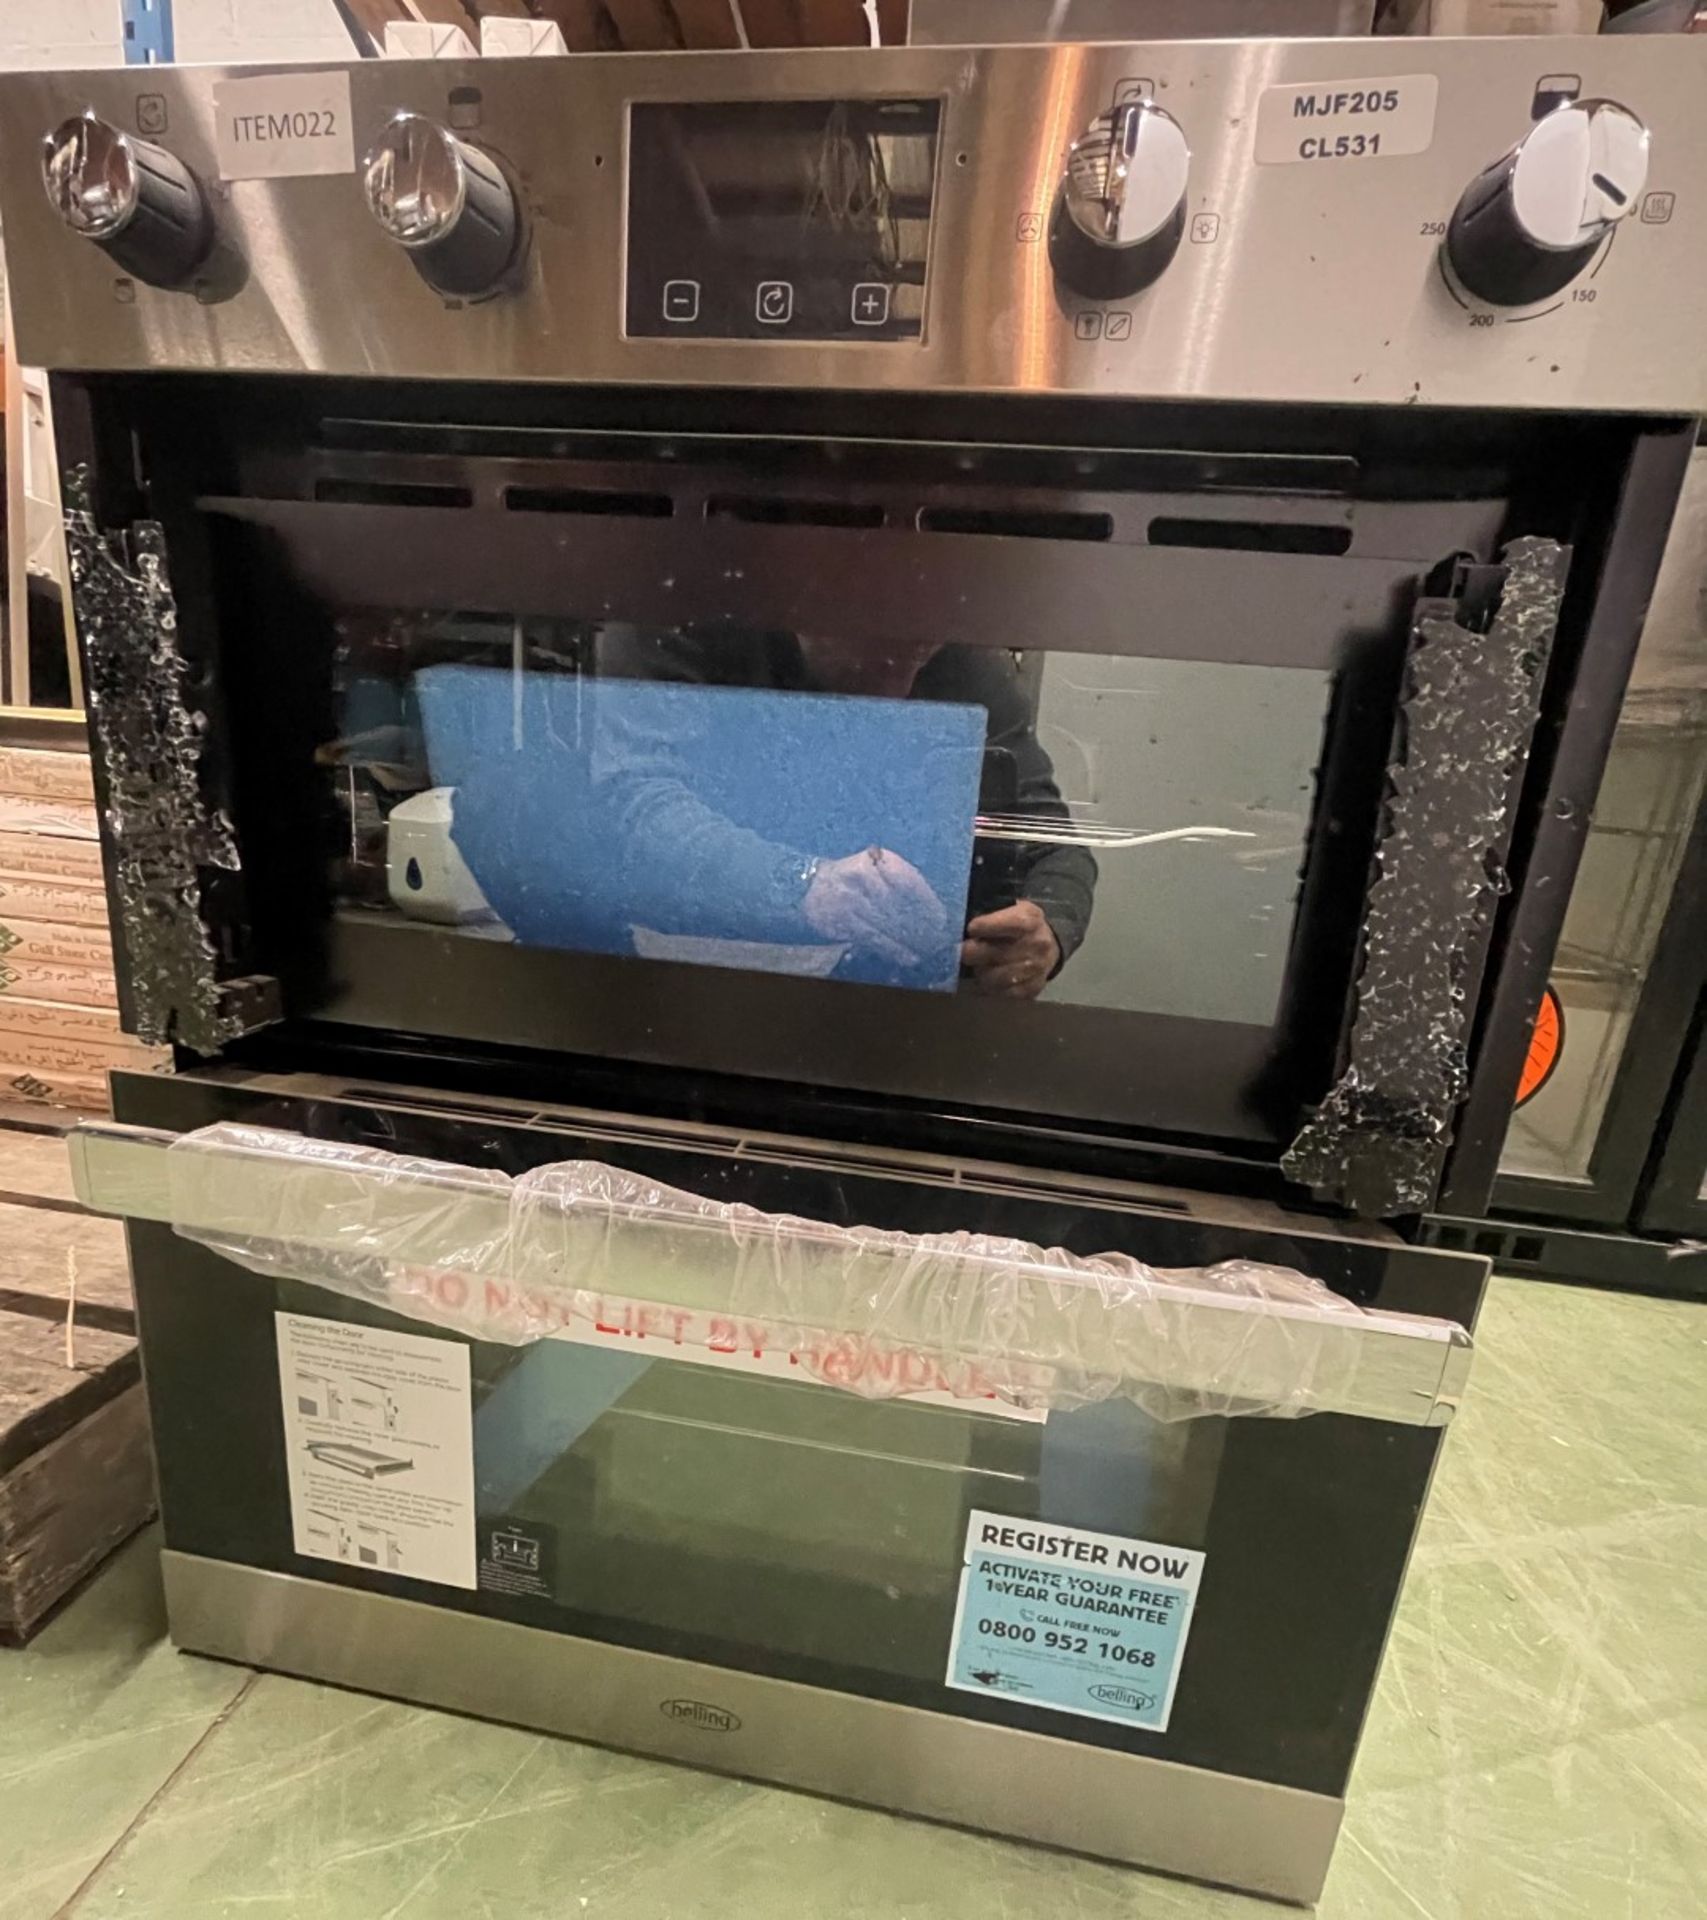 1 x Belling Integrated Oven - New and Unused With Damaged Glass Door - Image 3 of 7